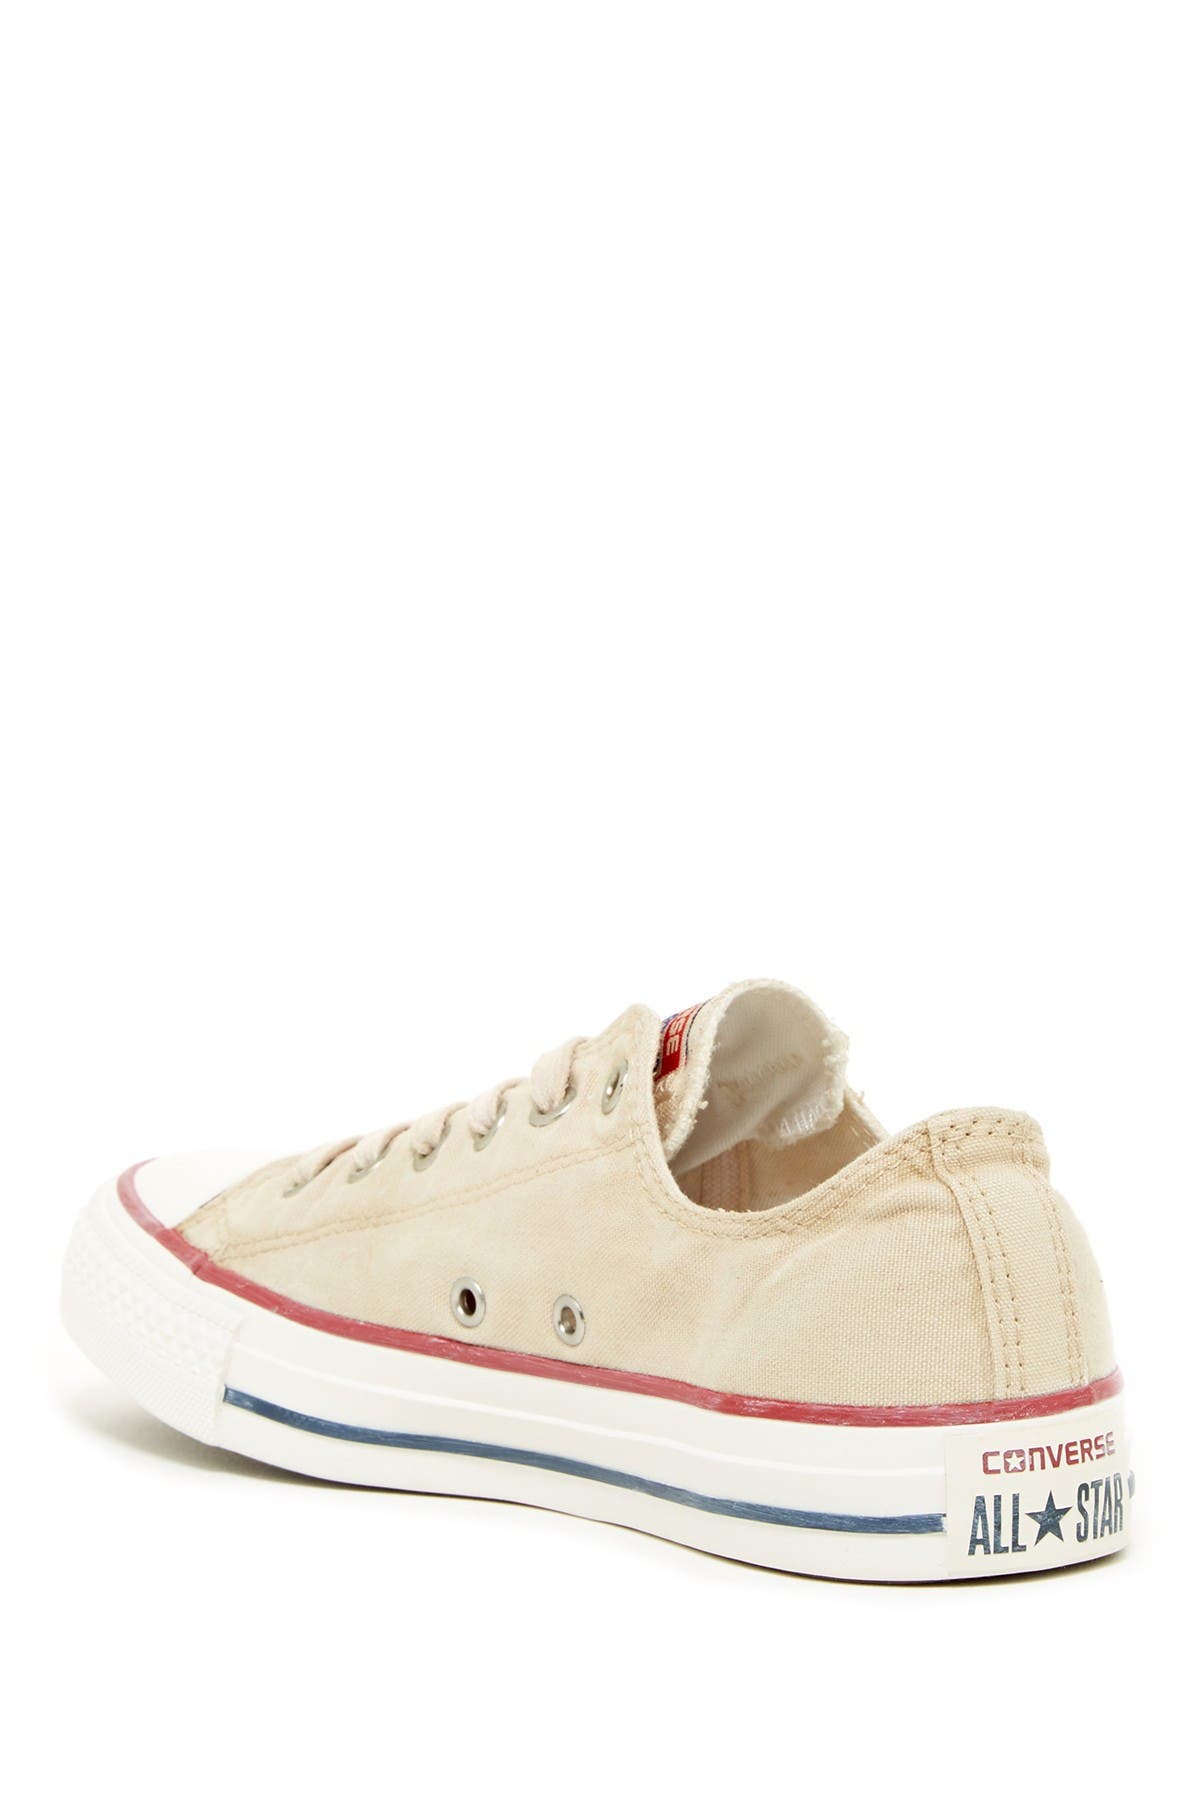 Converse | Chuck Taylor All Star Low 